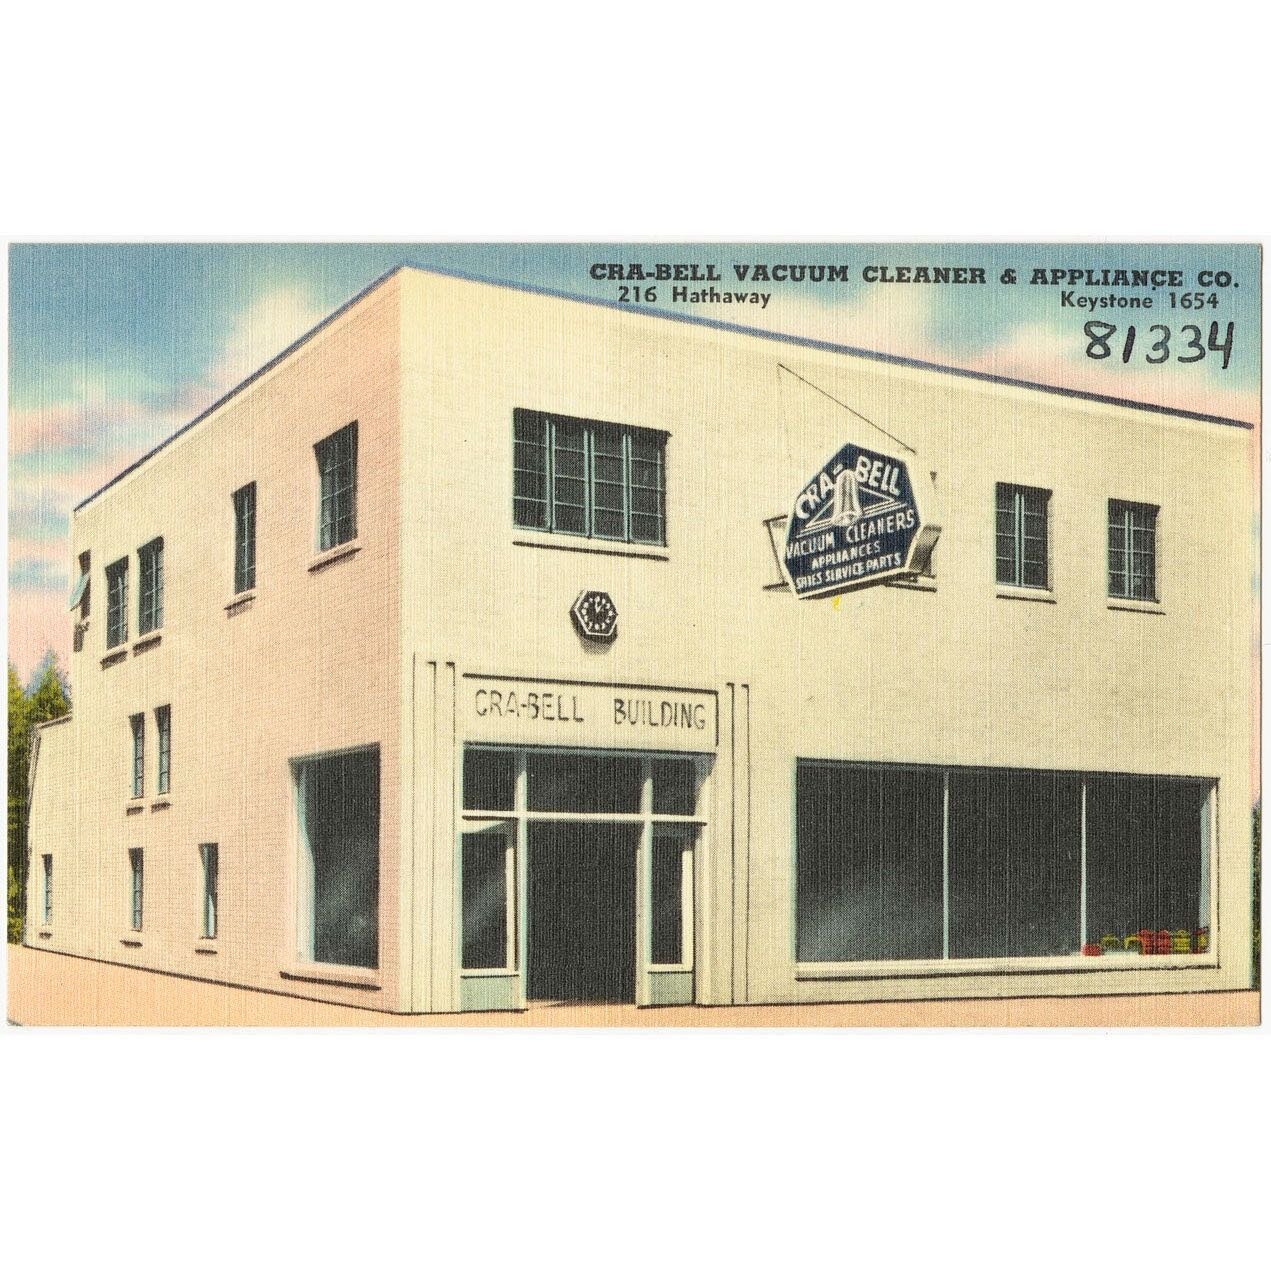 The Cra-Bell Building at 216 Westheimer has always been a favorite of ours thanks to its classic signage and understated Moderne entrance. Willis L. Craig, owner of the Cra-Bell Vacuum Cleaner &amp; Appliance Co. (he was the &ldquo;Cra&rdquo; in the 